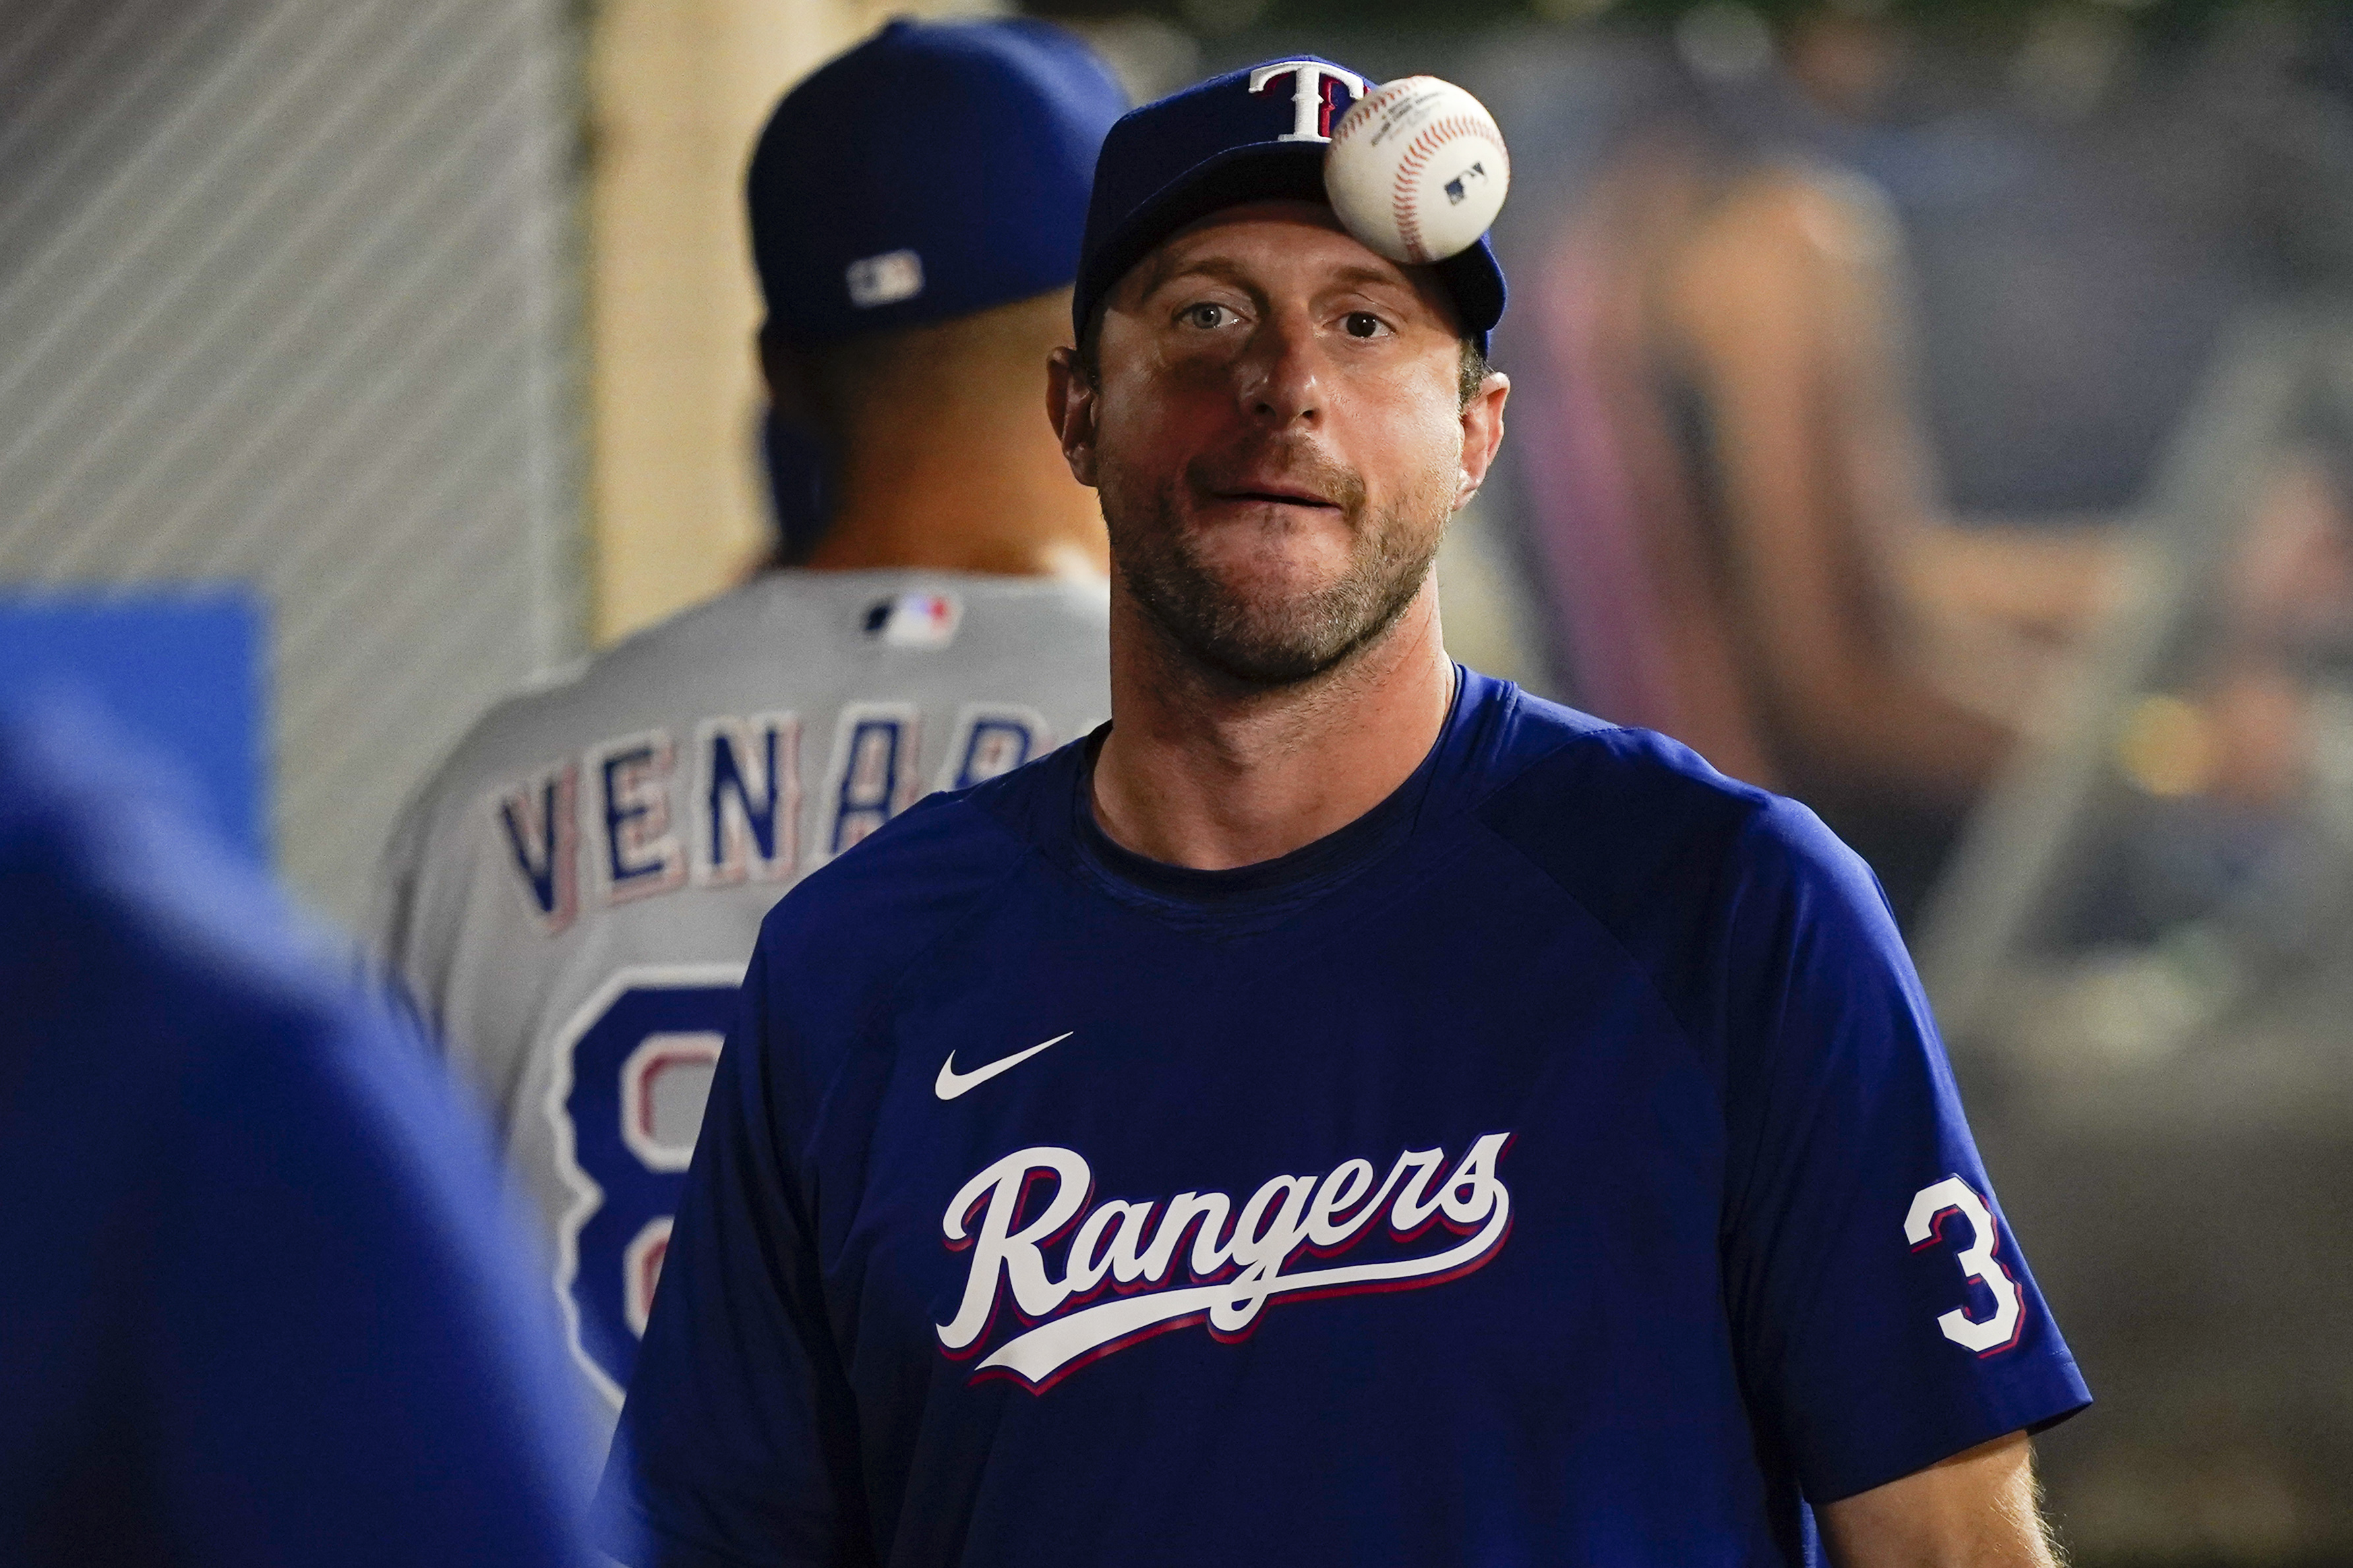 MLB notebook: Max Scherzer says he is ready to pitch for Rangers in ALCS